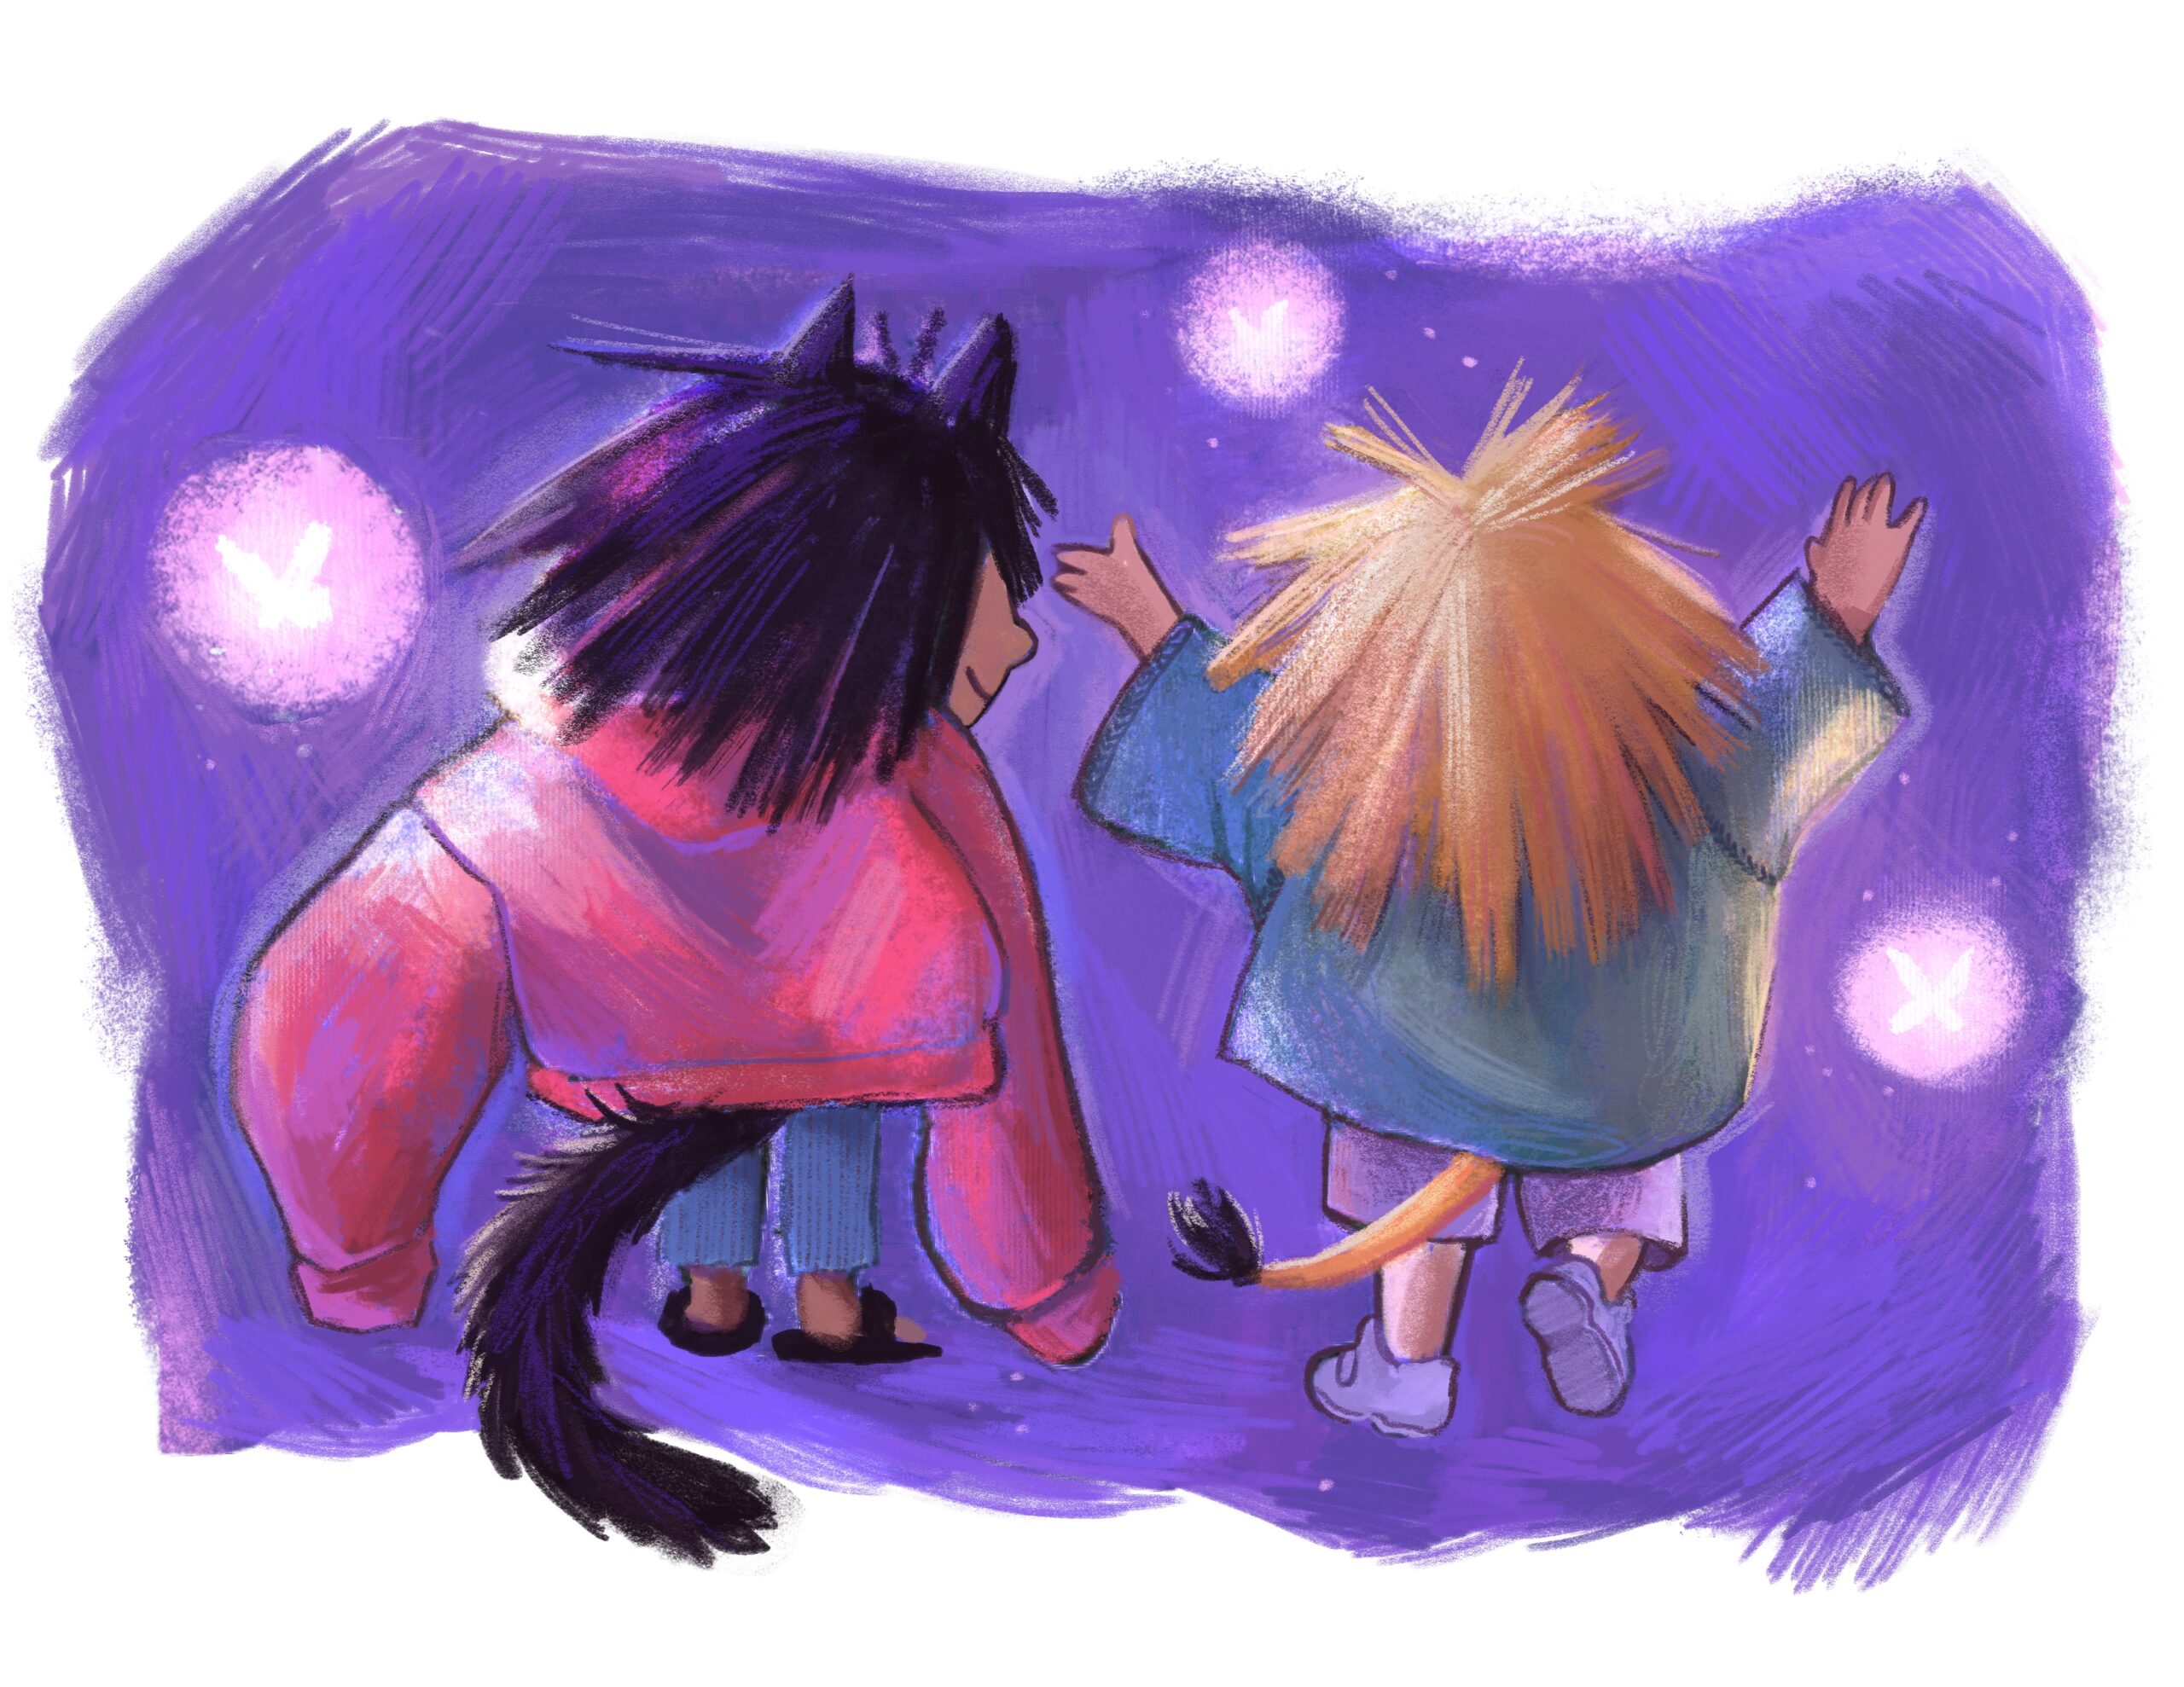 Make Believe, 2022
Digital

A small spot illustration of childhood friends. Drawing on my nostalgic summertime experiences with my own friend, these kids can be seen playing make believe as different feline friends.